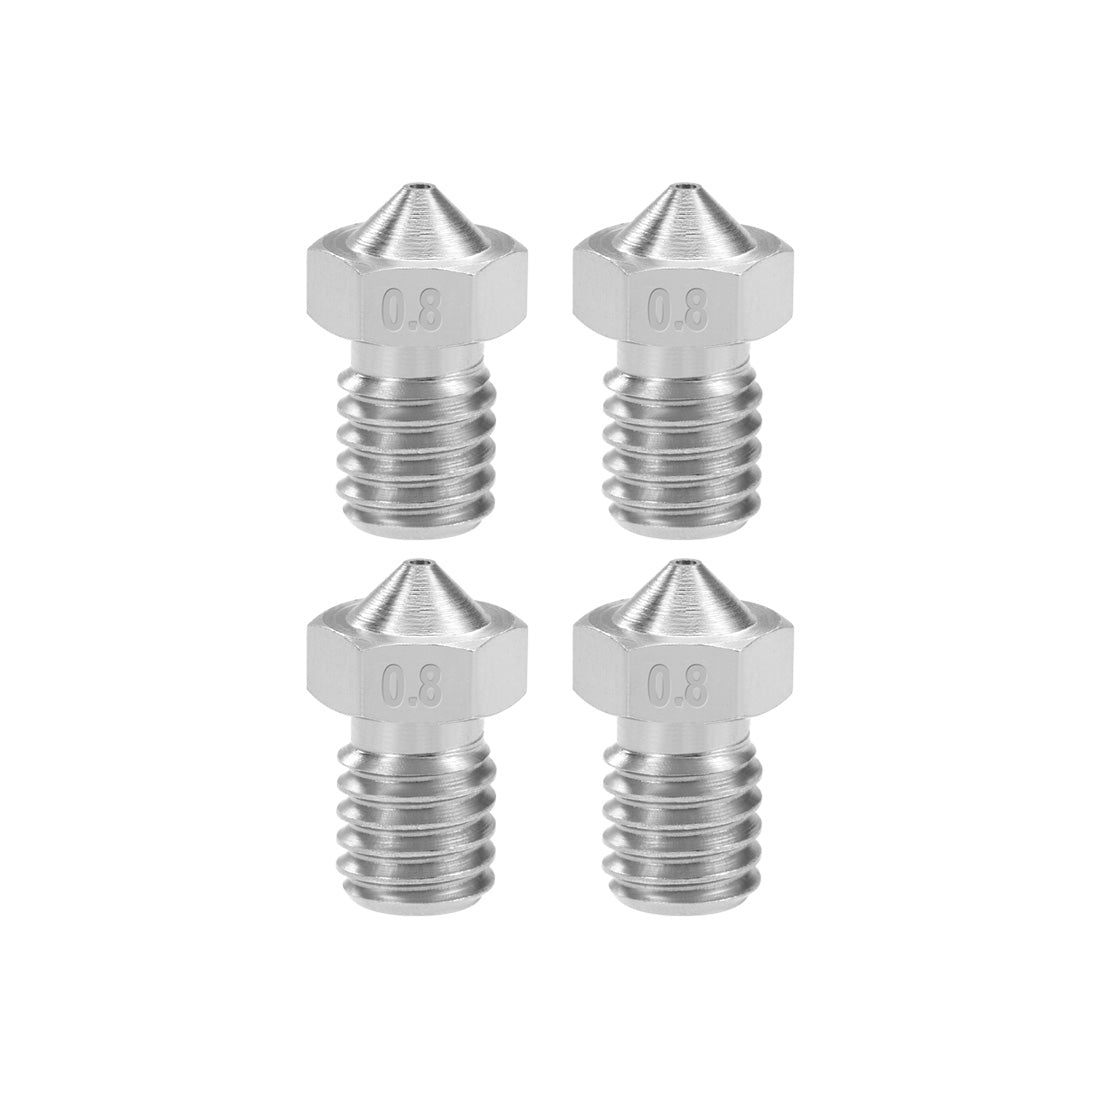 uxcell Uxcell 0.8mm 3D Printer Nozzle Head M6 Thread Replacement for V5 V6 3mm Extruder Print, Stainless Steel 4pcs